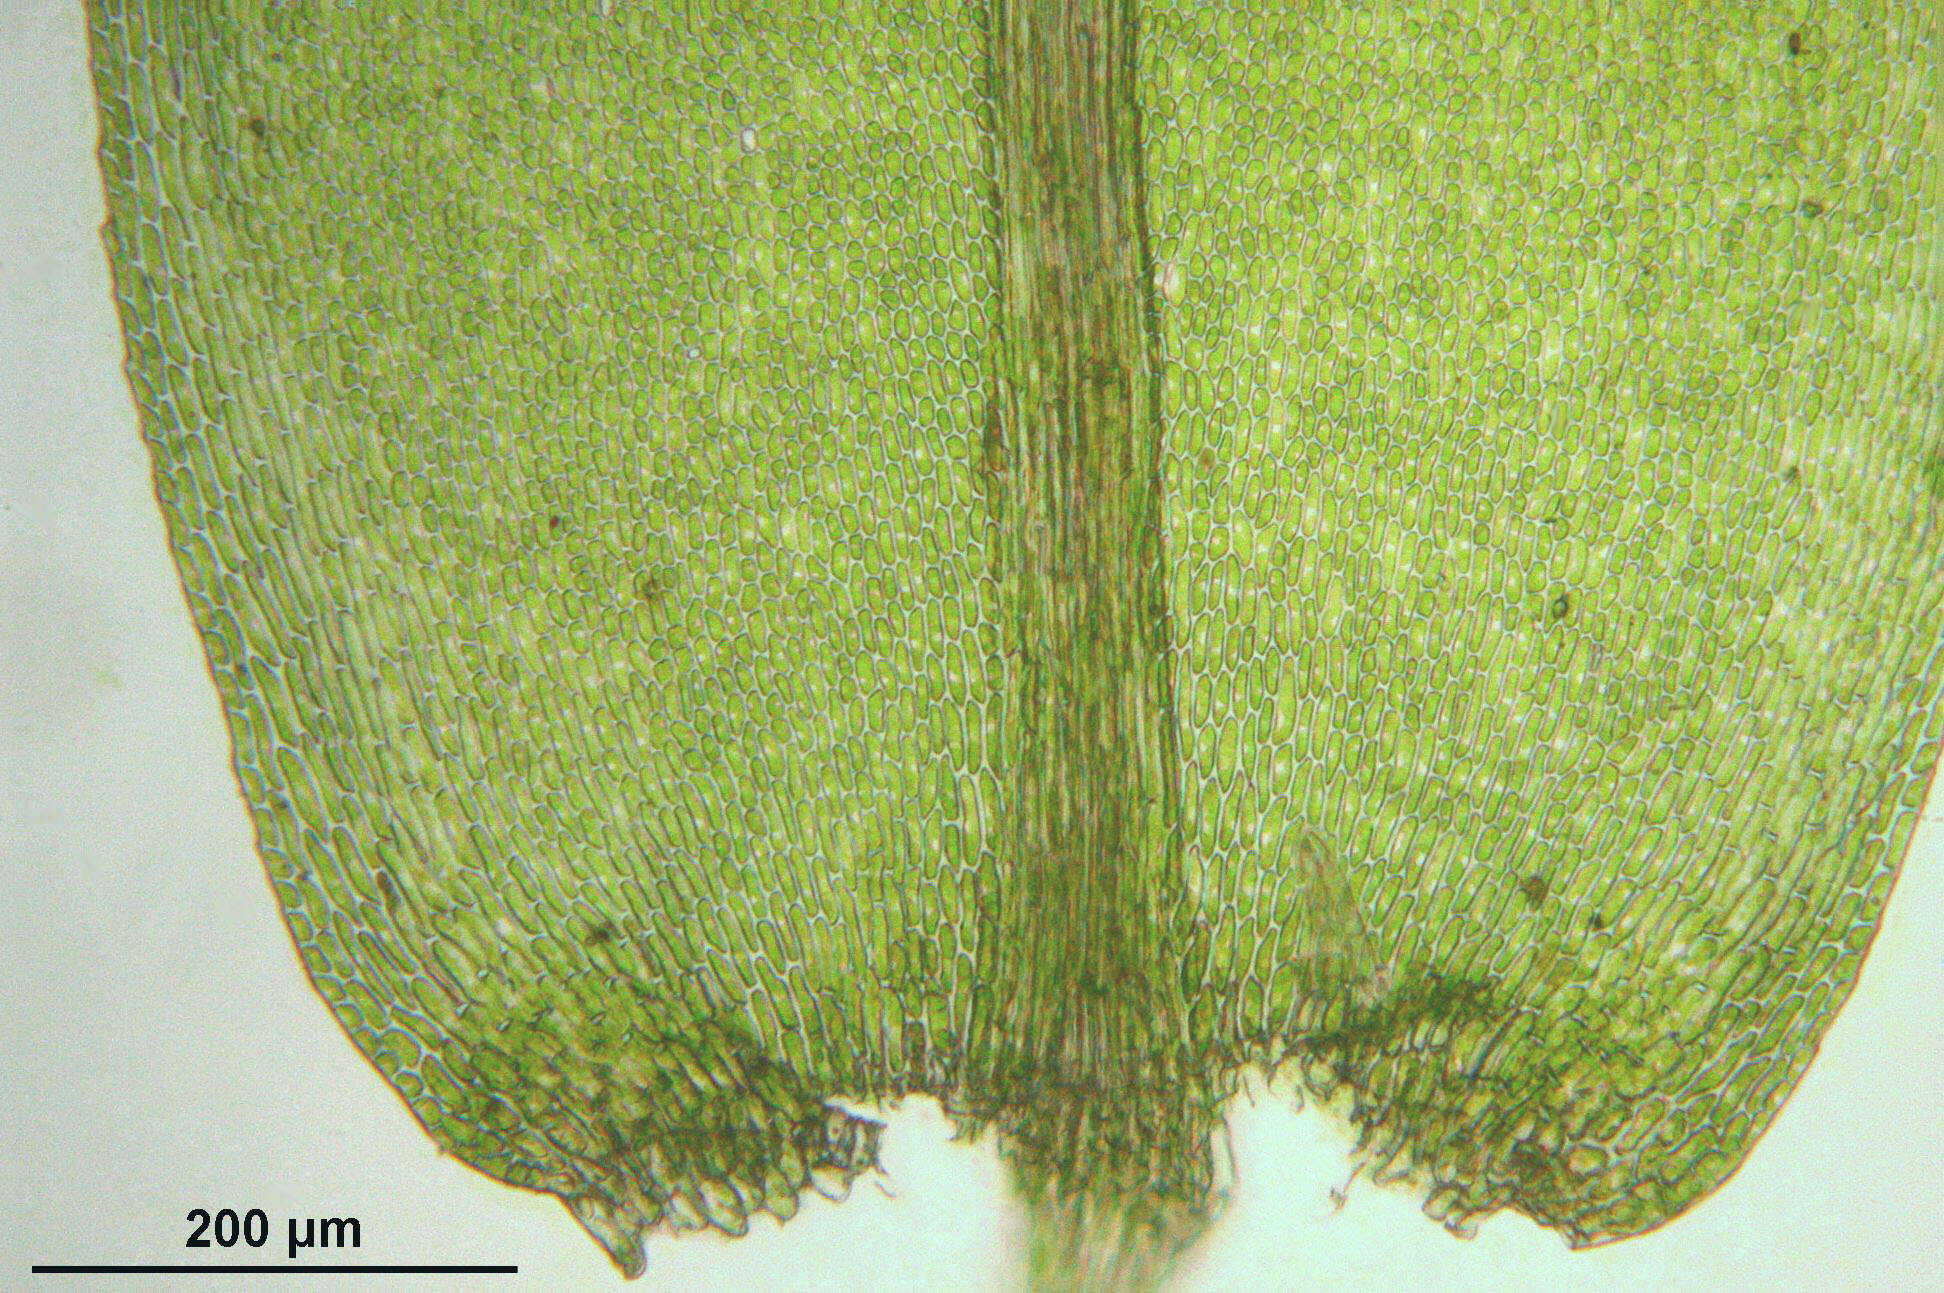 Image of Fox-tail Feather-moss